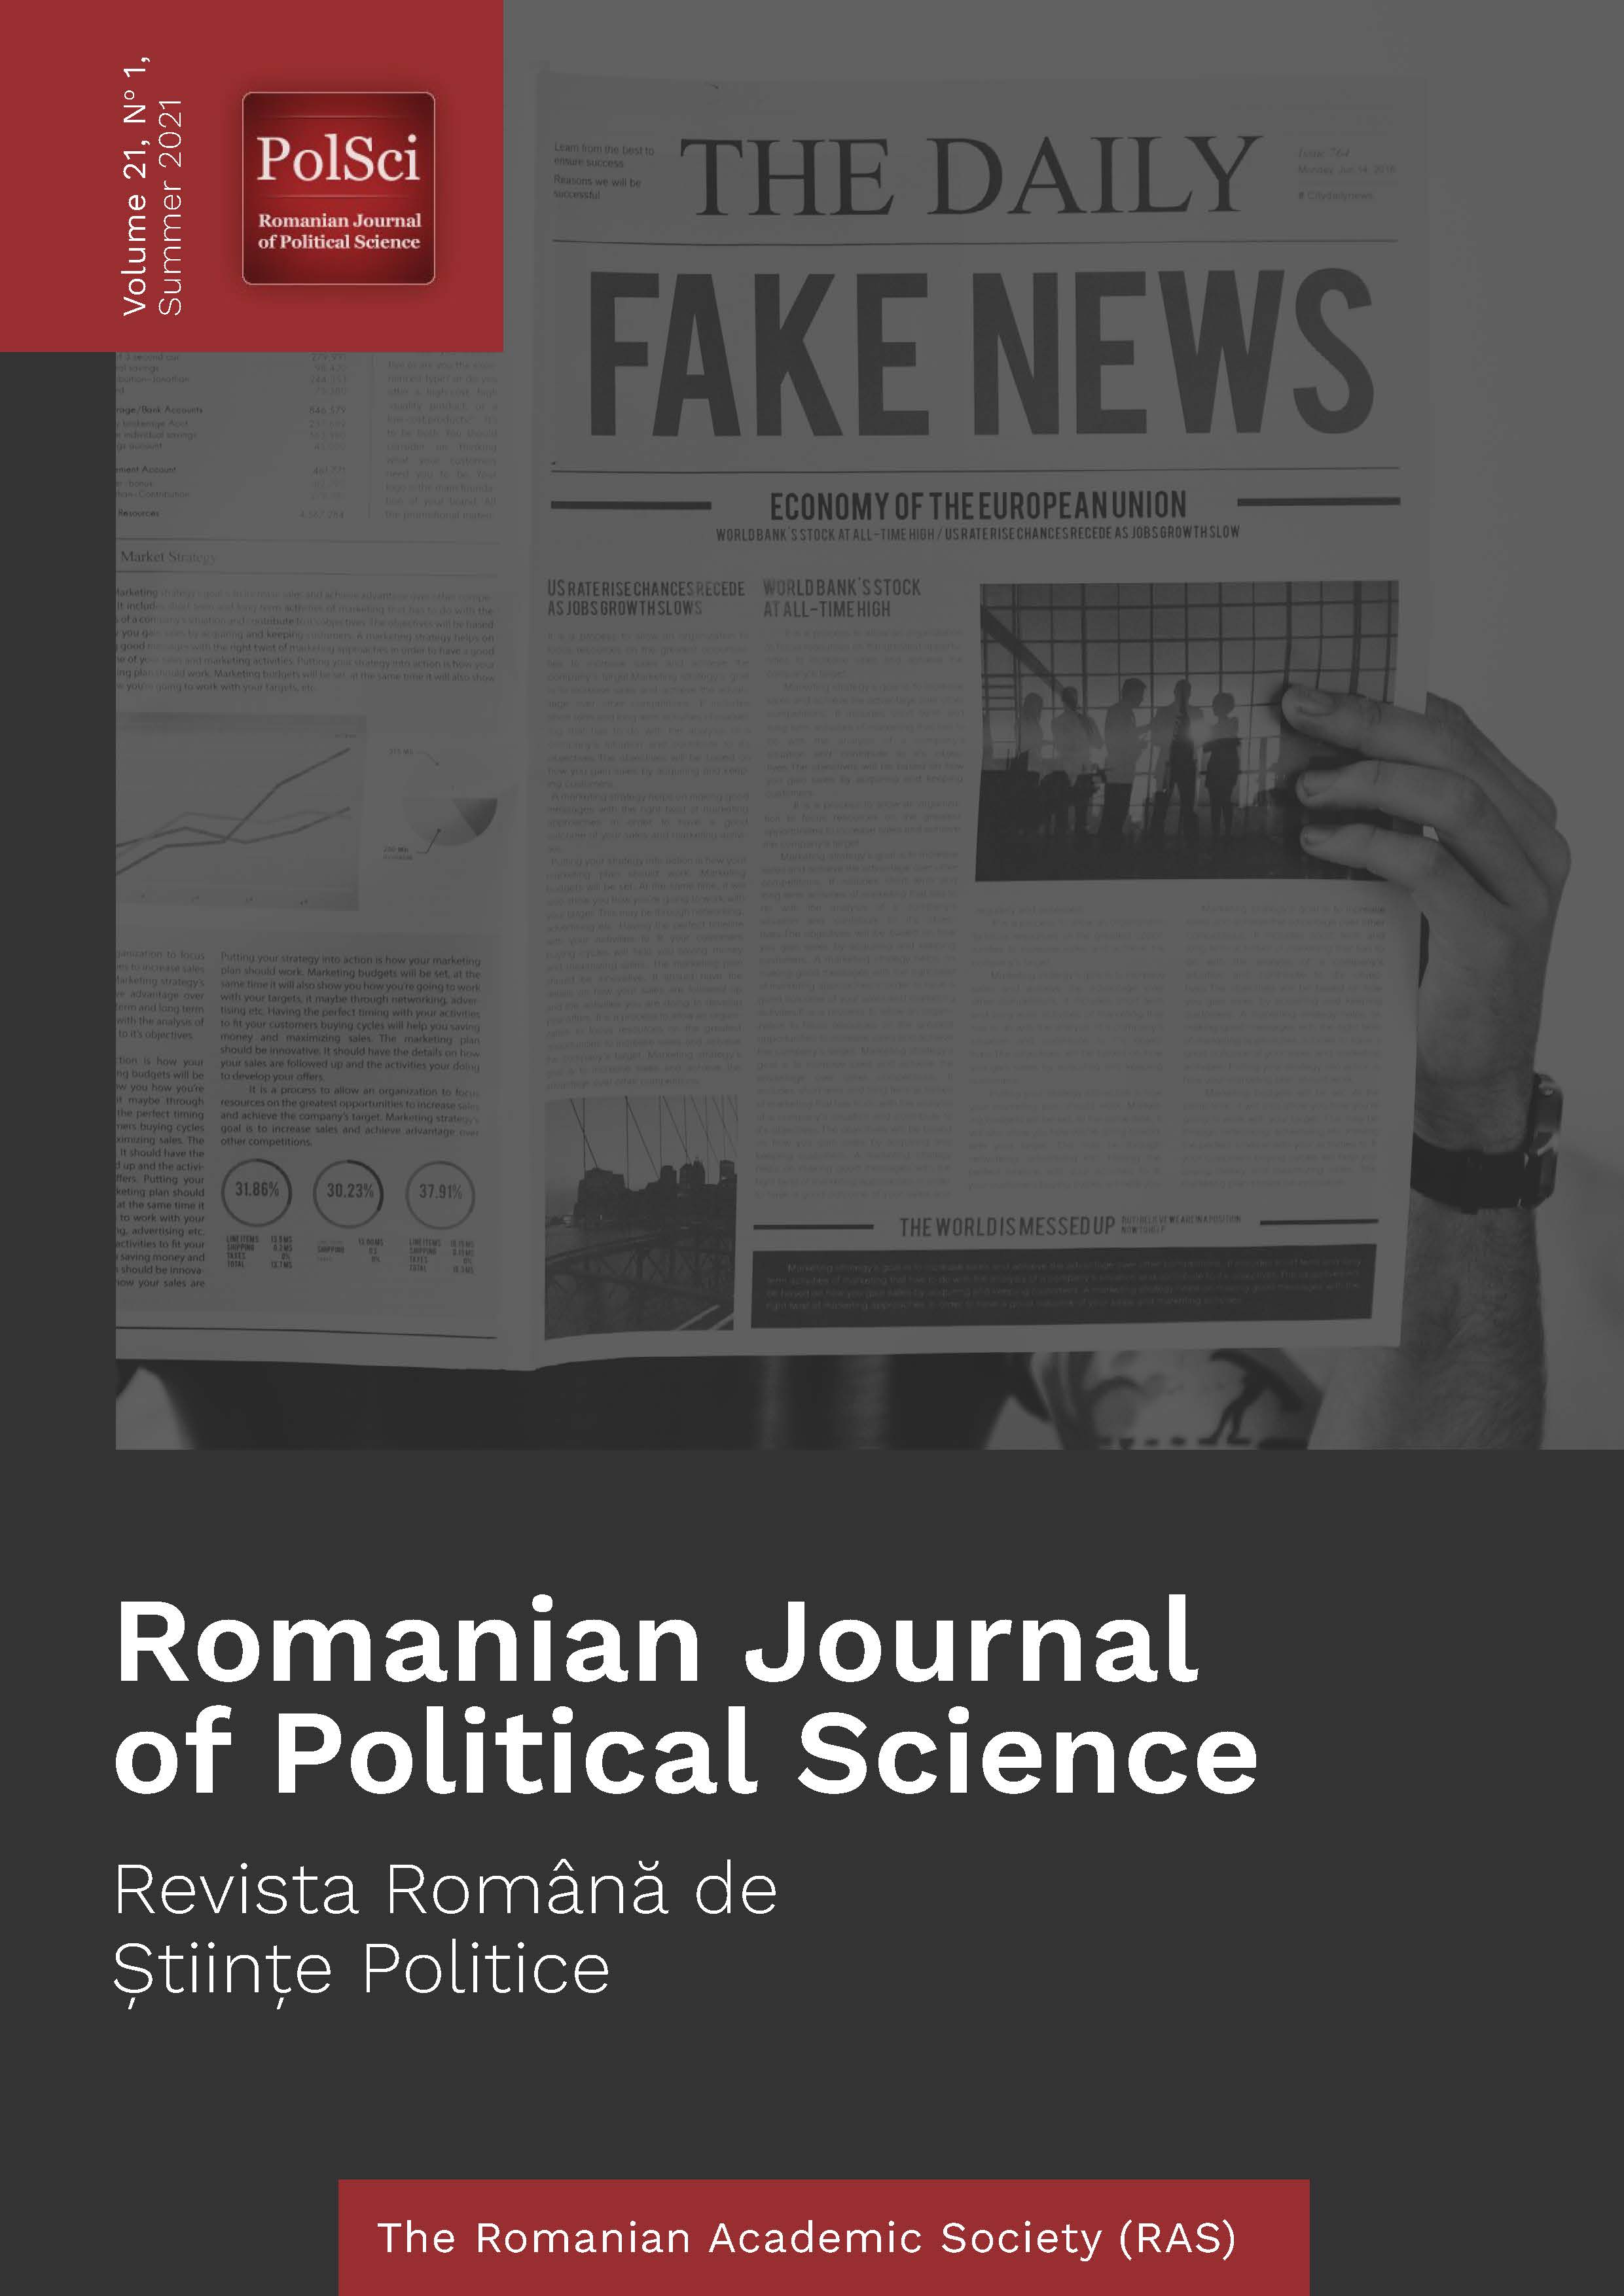 Political parties and the state in Romania: between dependence on state resources and its capture